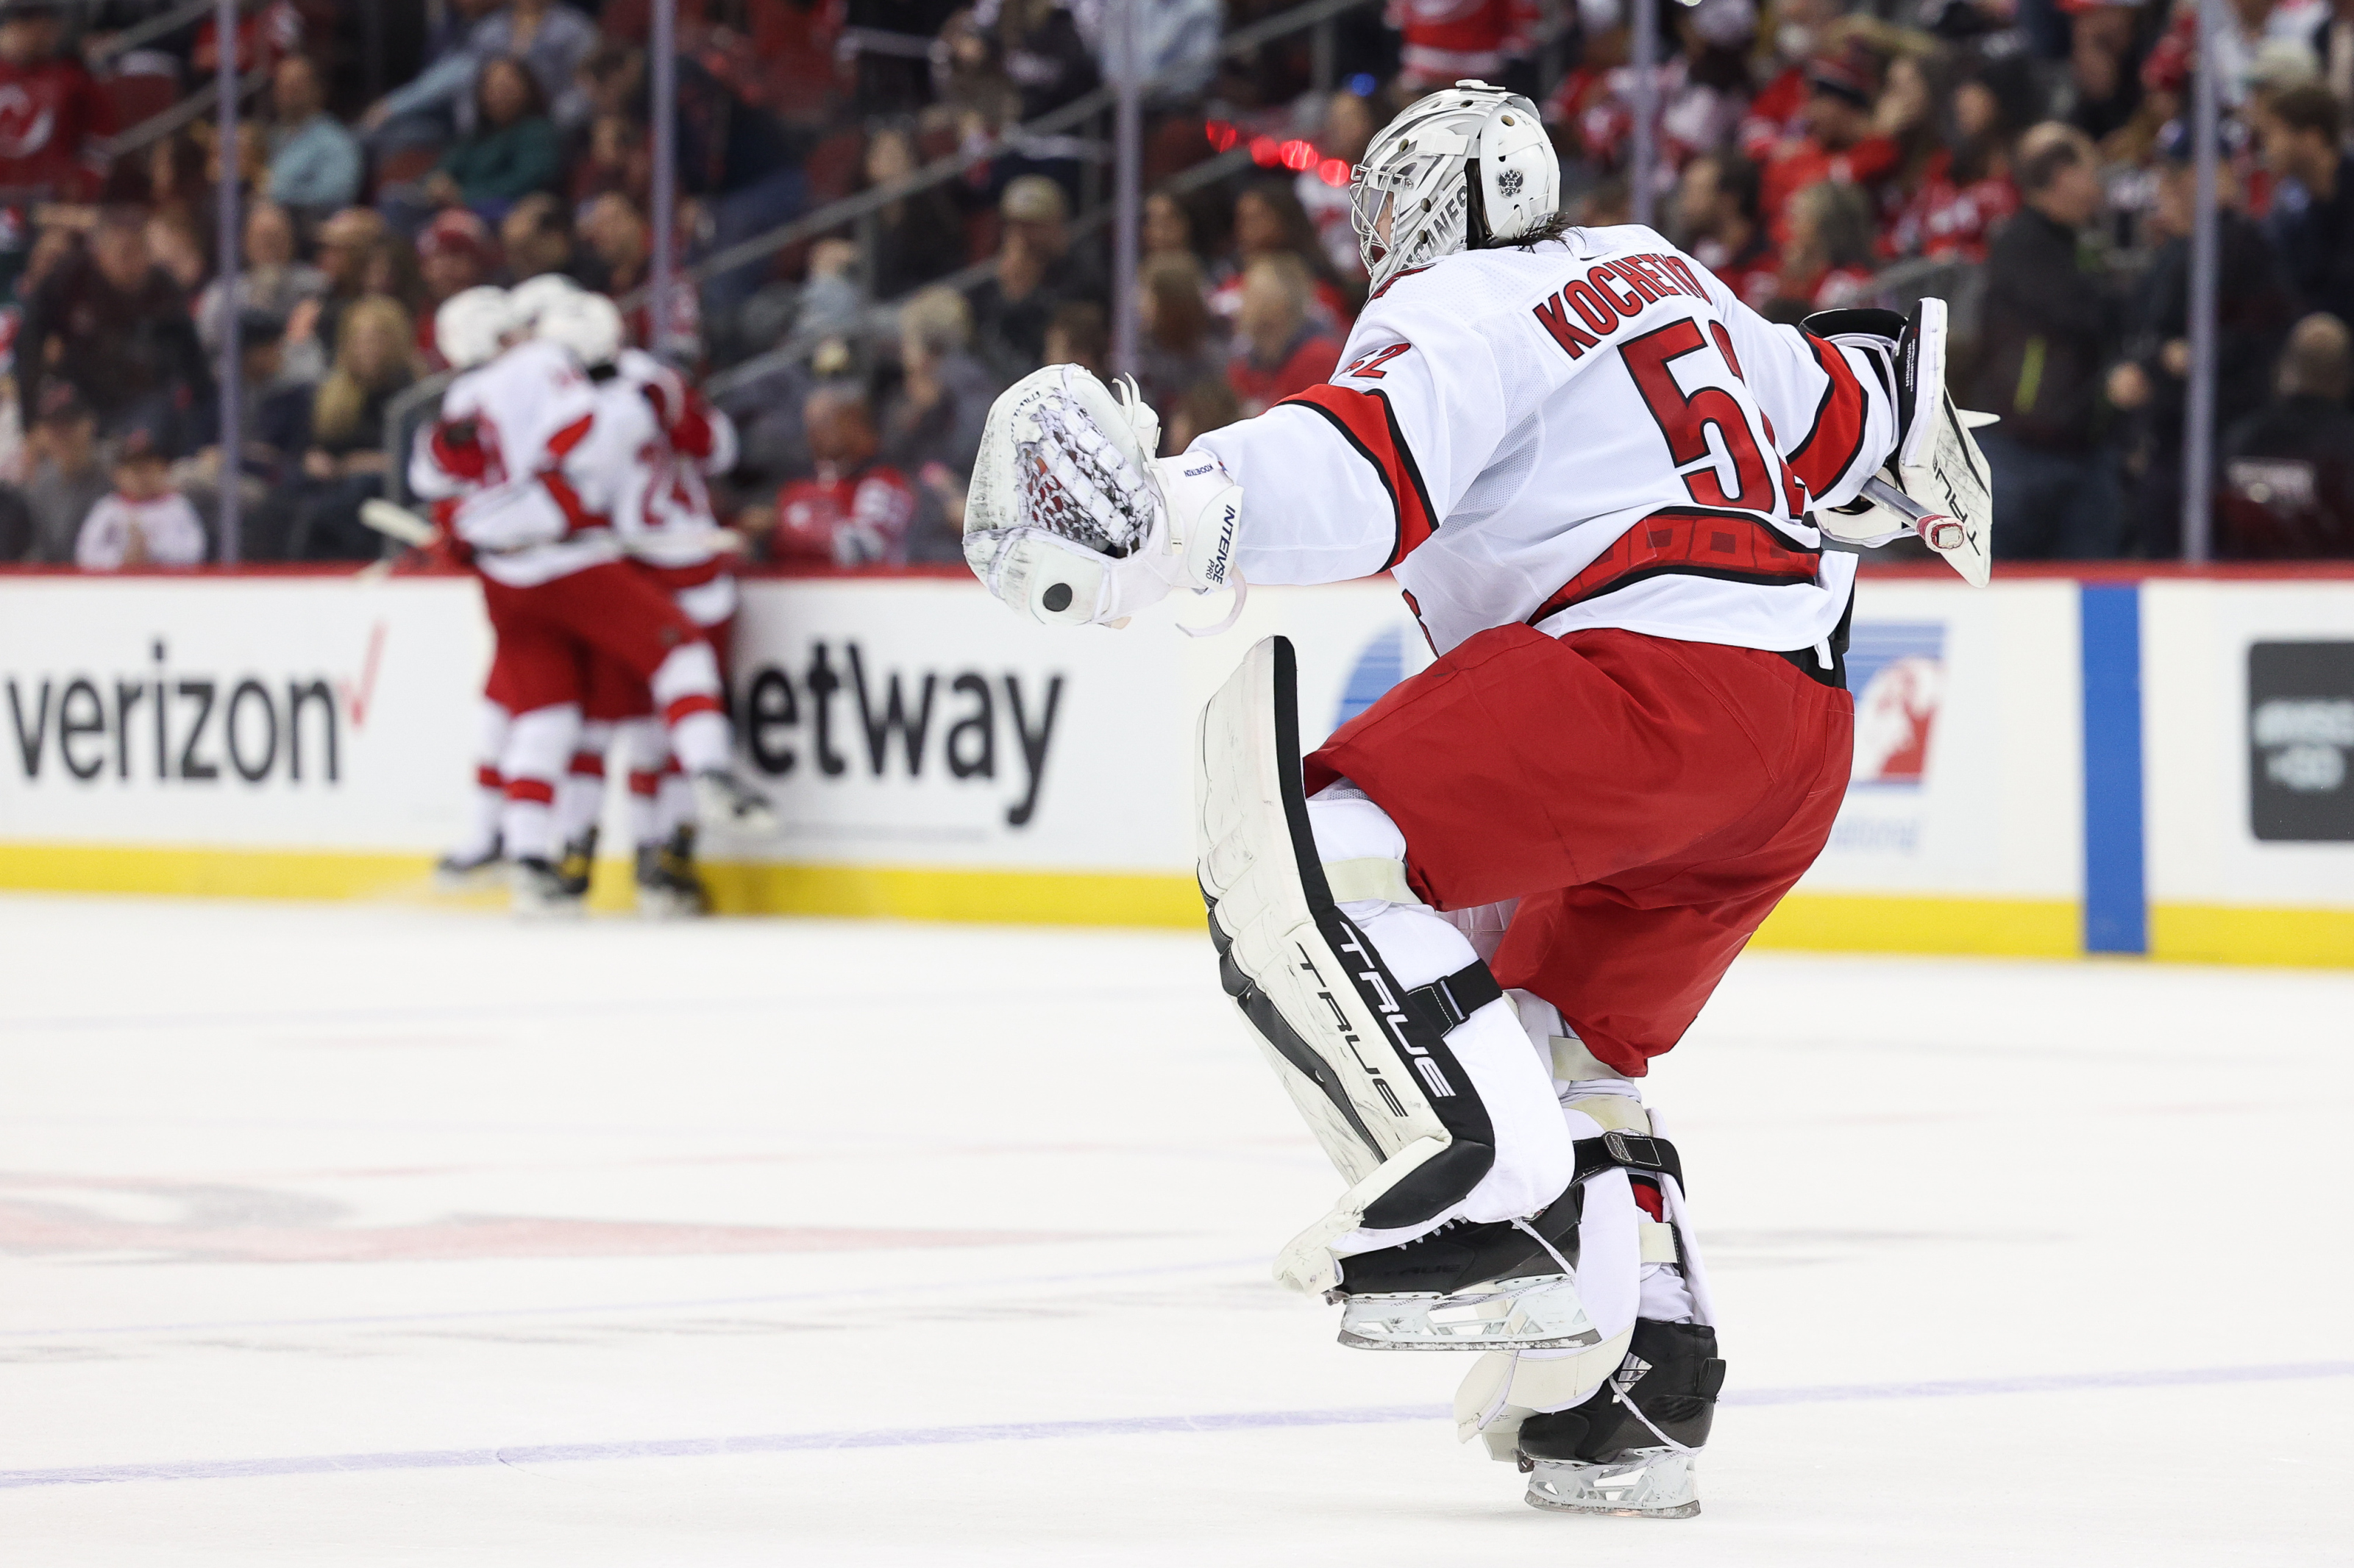 Devils Pick Up 3-2 Win Against Rangers, GAME STORY